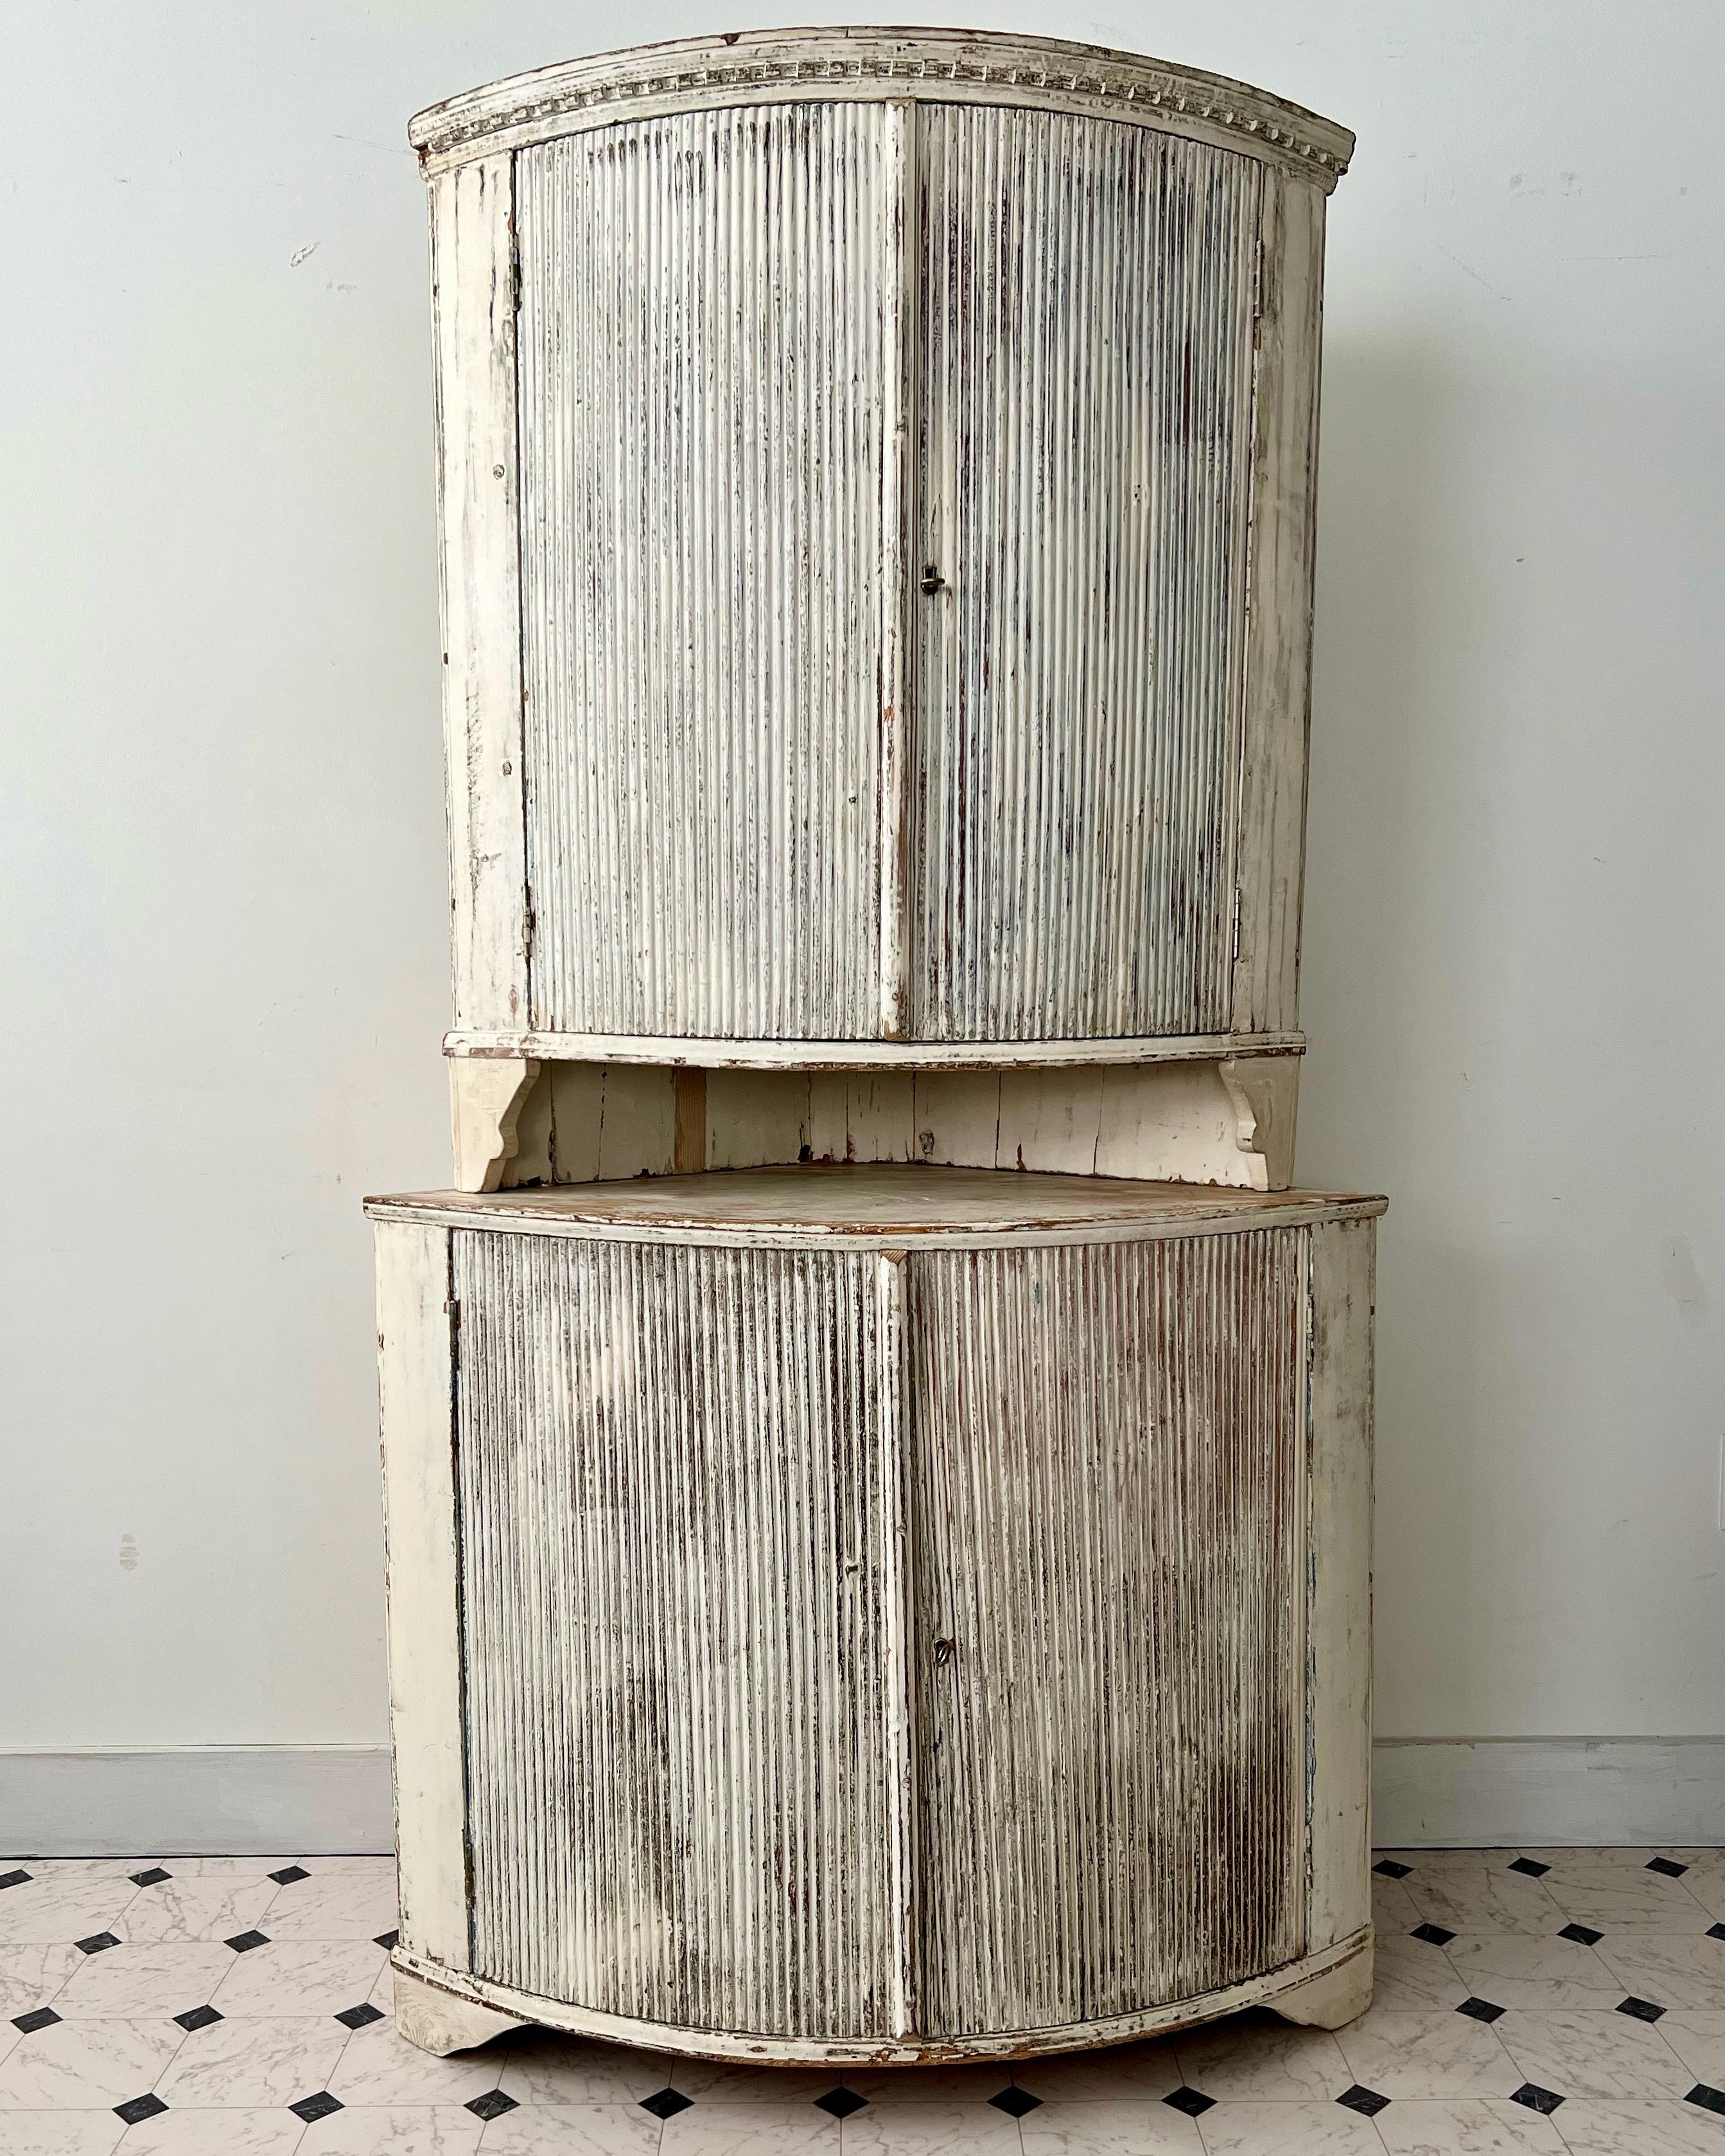 19th century Swedish two-part bowfronted 4 door corner cupboard with reeded panels.
Dry scraped from most recent painted surface.